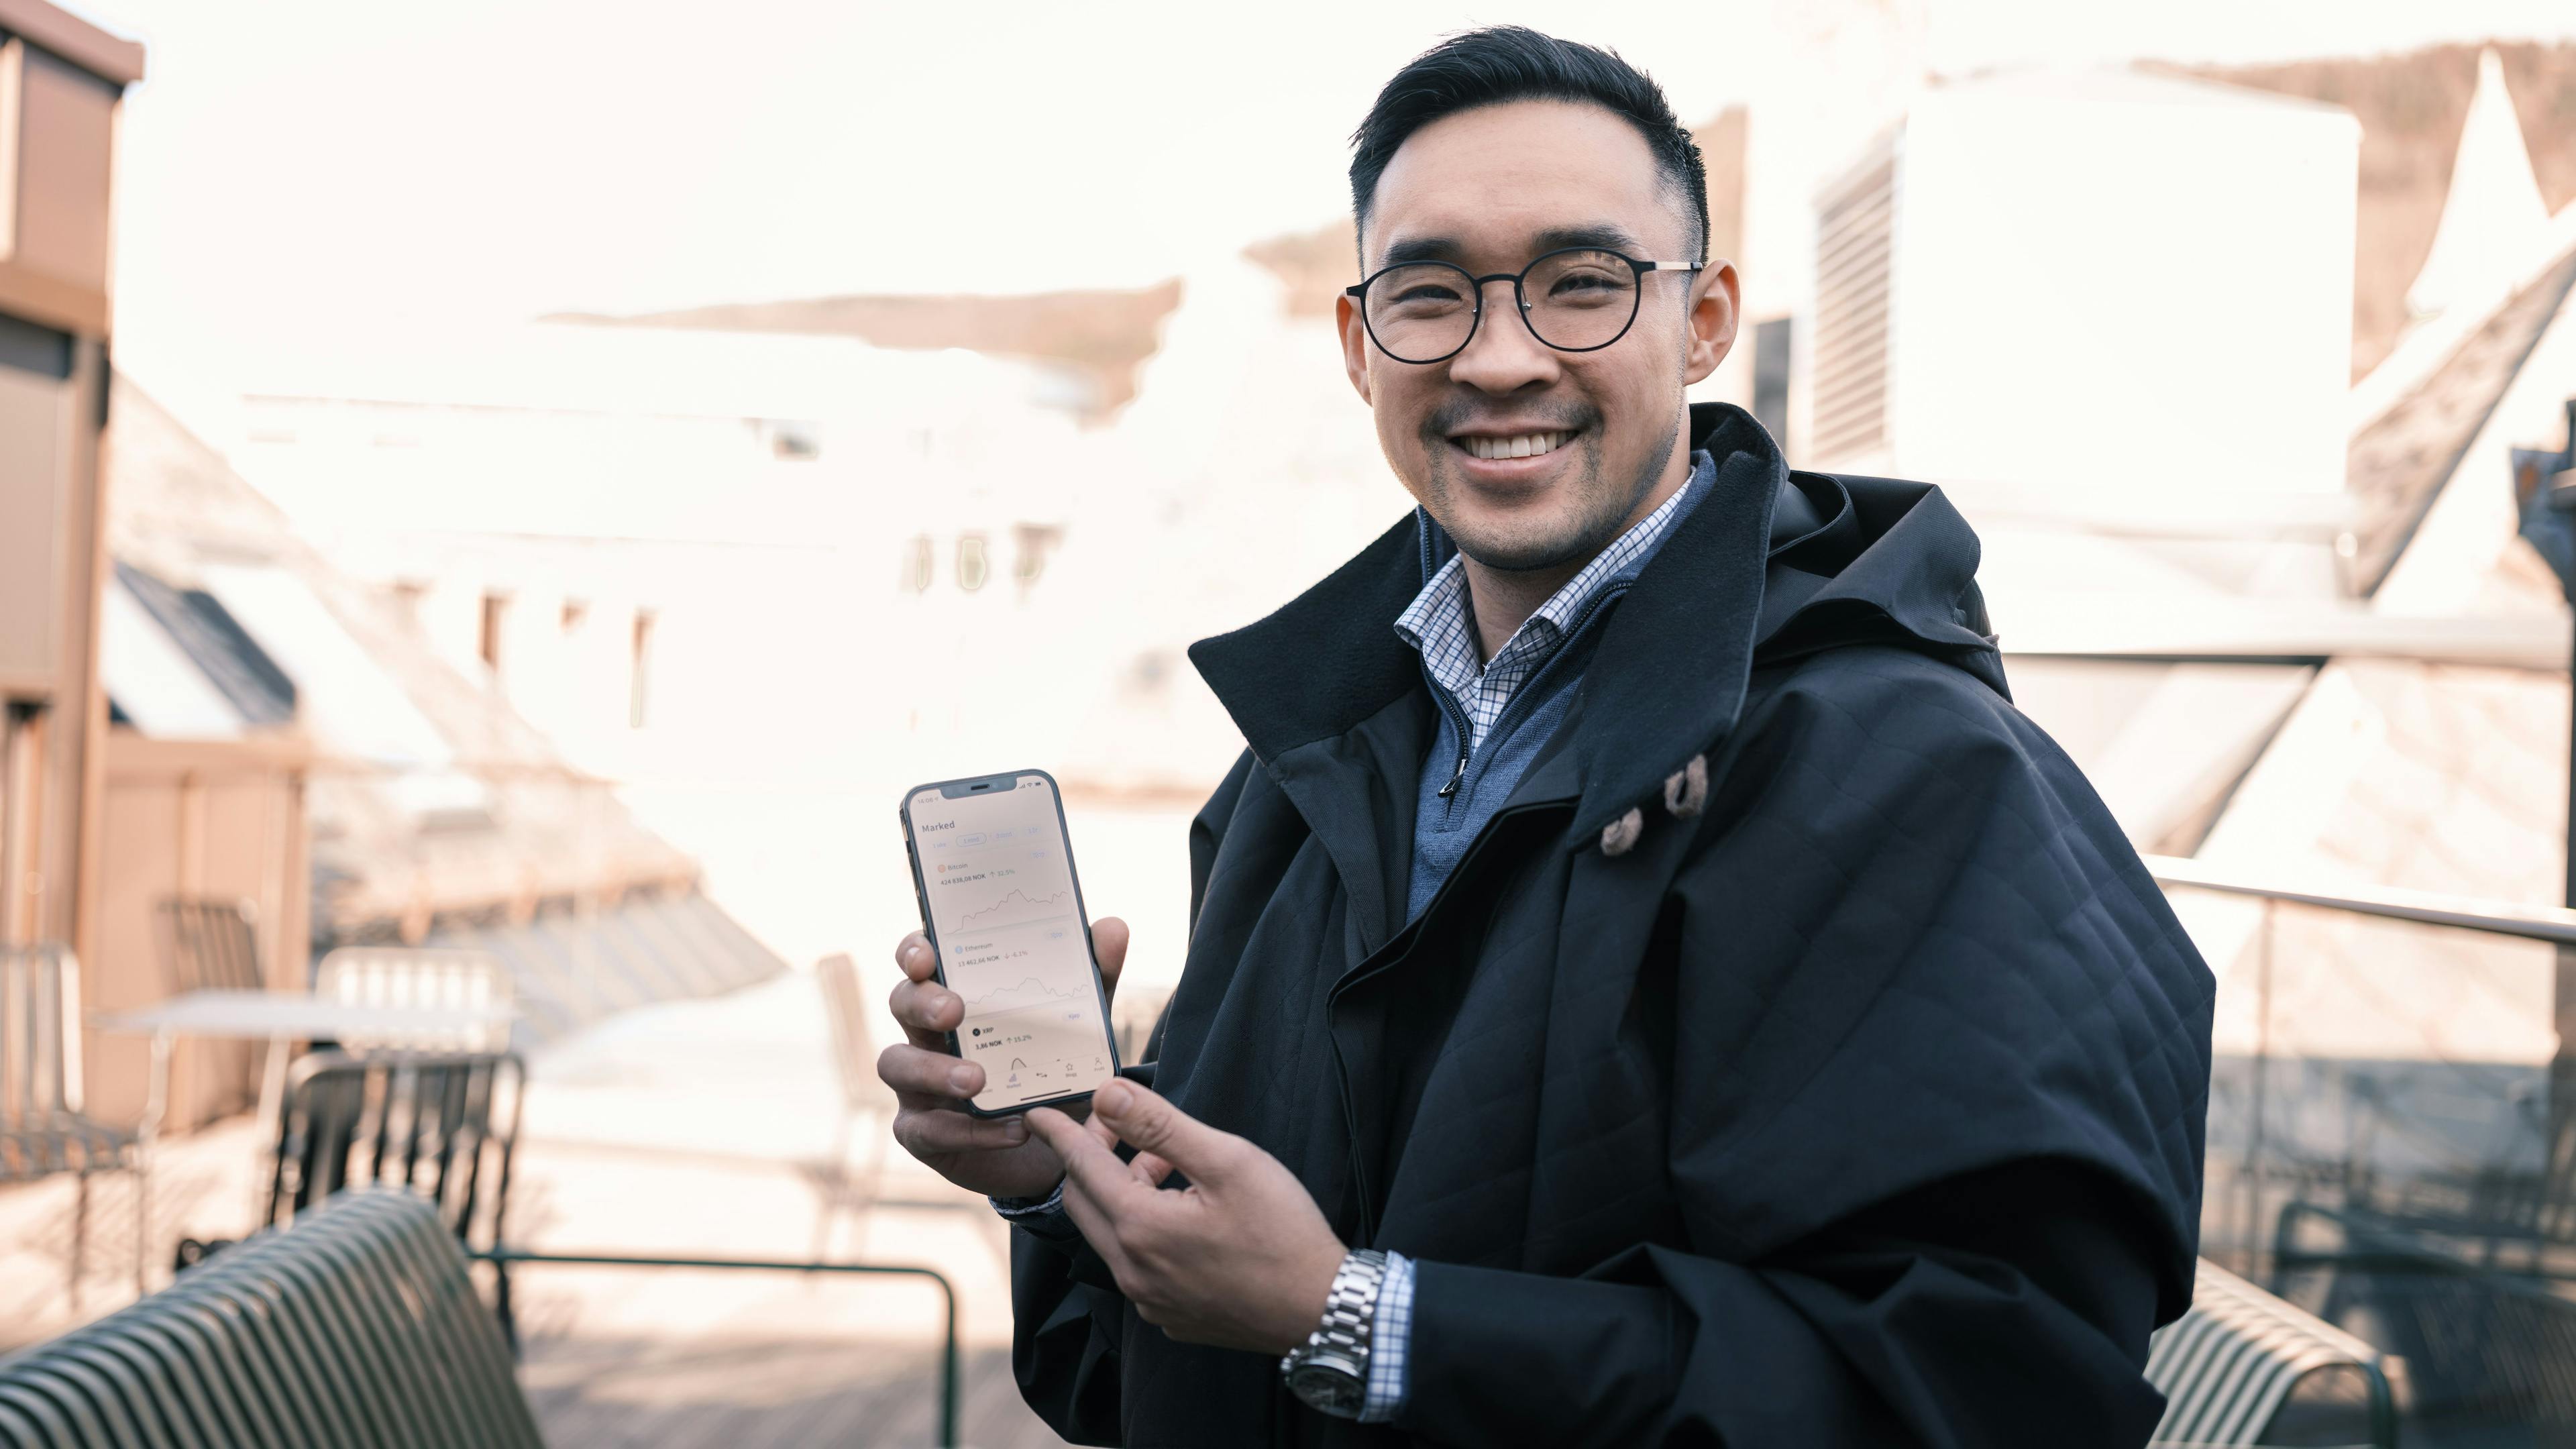 Huy Le uses Firi on his phone and is thoroughly convinced of the Norwegian cryptocurrency exchange